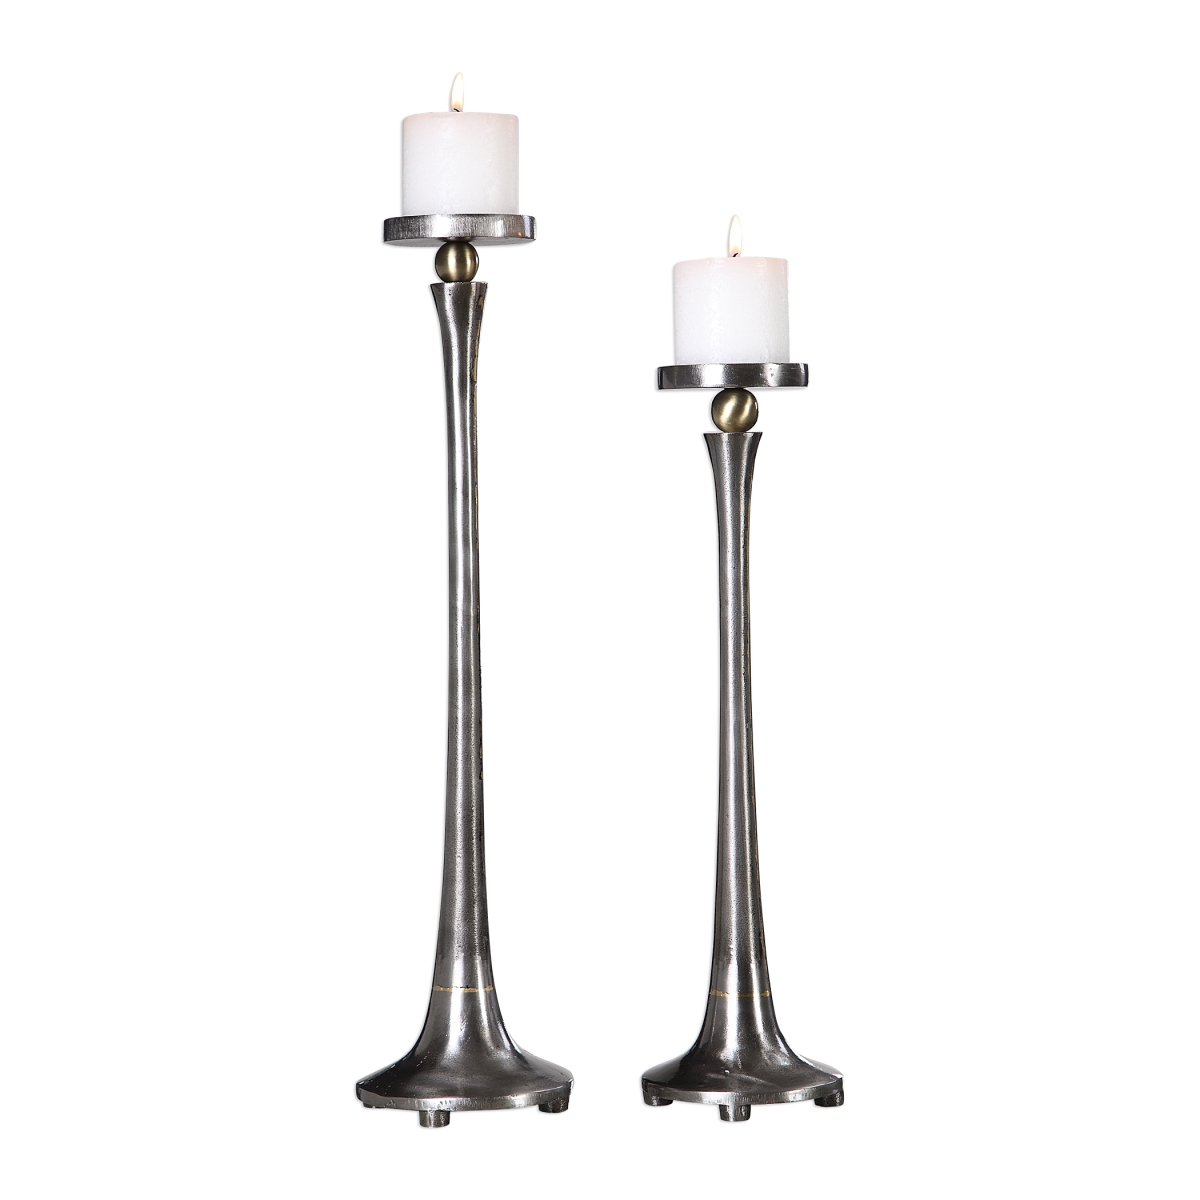 Picture of 212 Main 18994 Aliso Cast Iron Candleholders - Set of 2